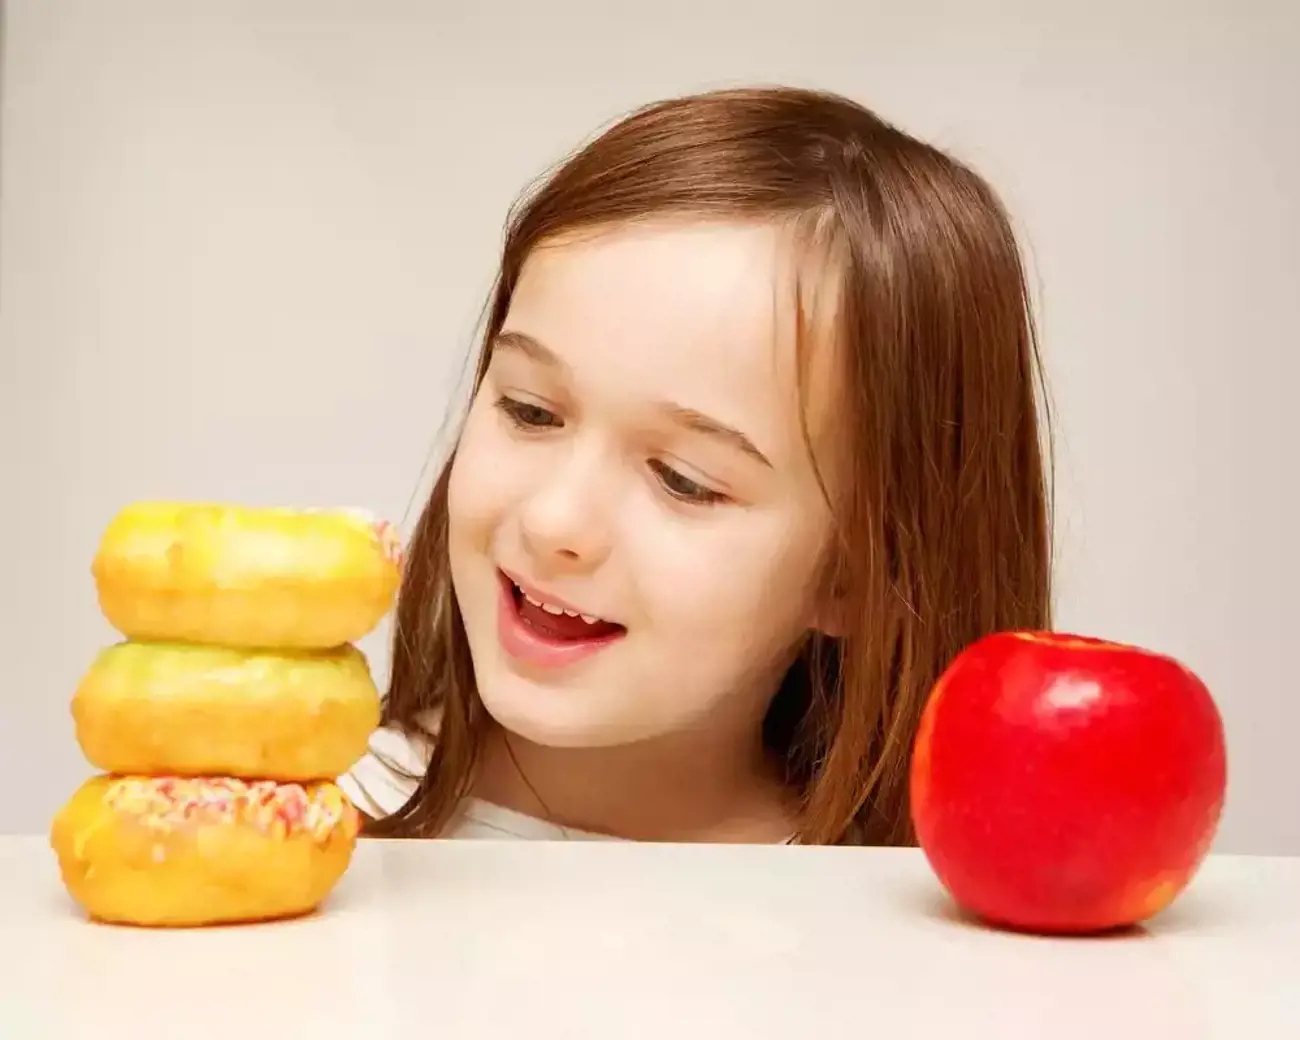 Blog Image for article Food for thought - Obesity rates amongst young children